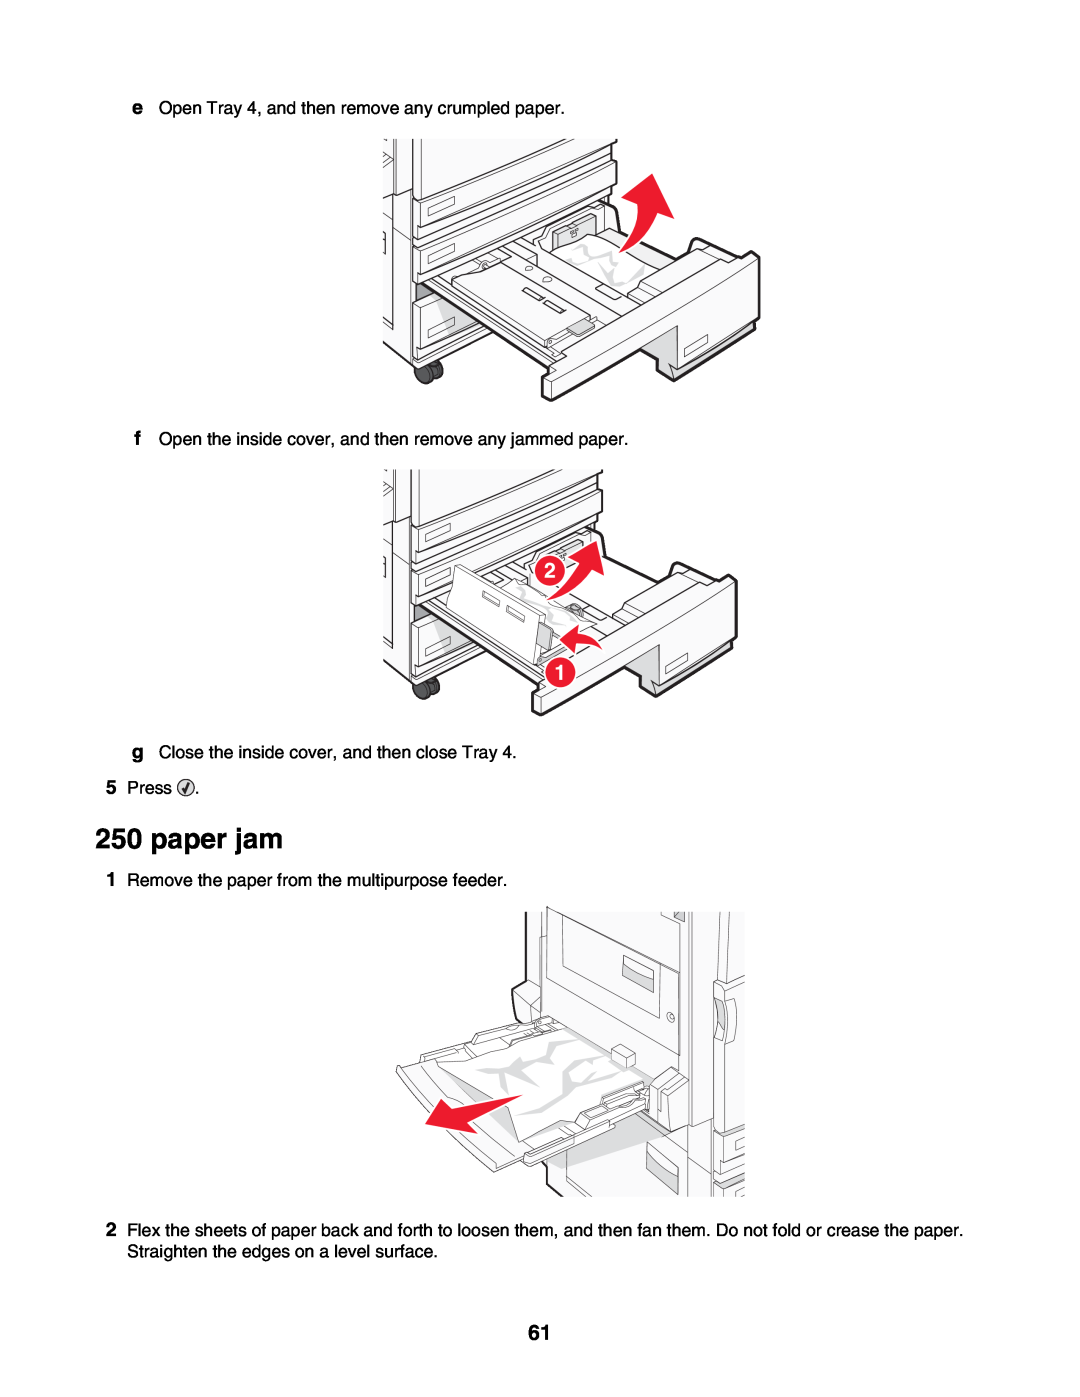 Lexmark C935 paper jam, e Open Tray 4, and then remove any crumpled paper, Remove the paper from the multipurpose feeder 